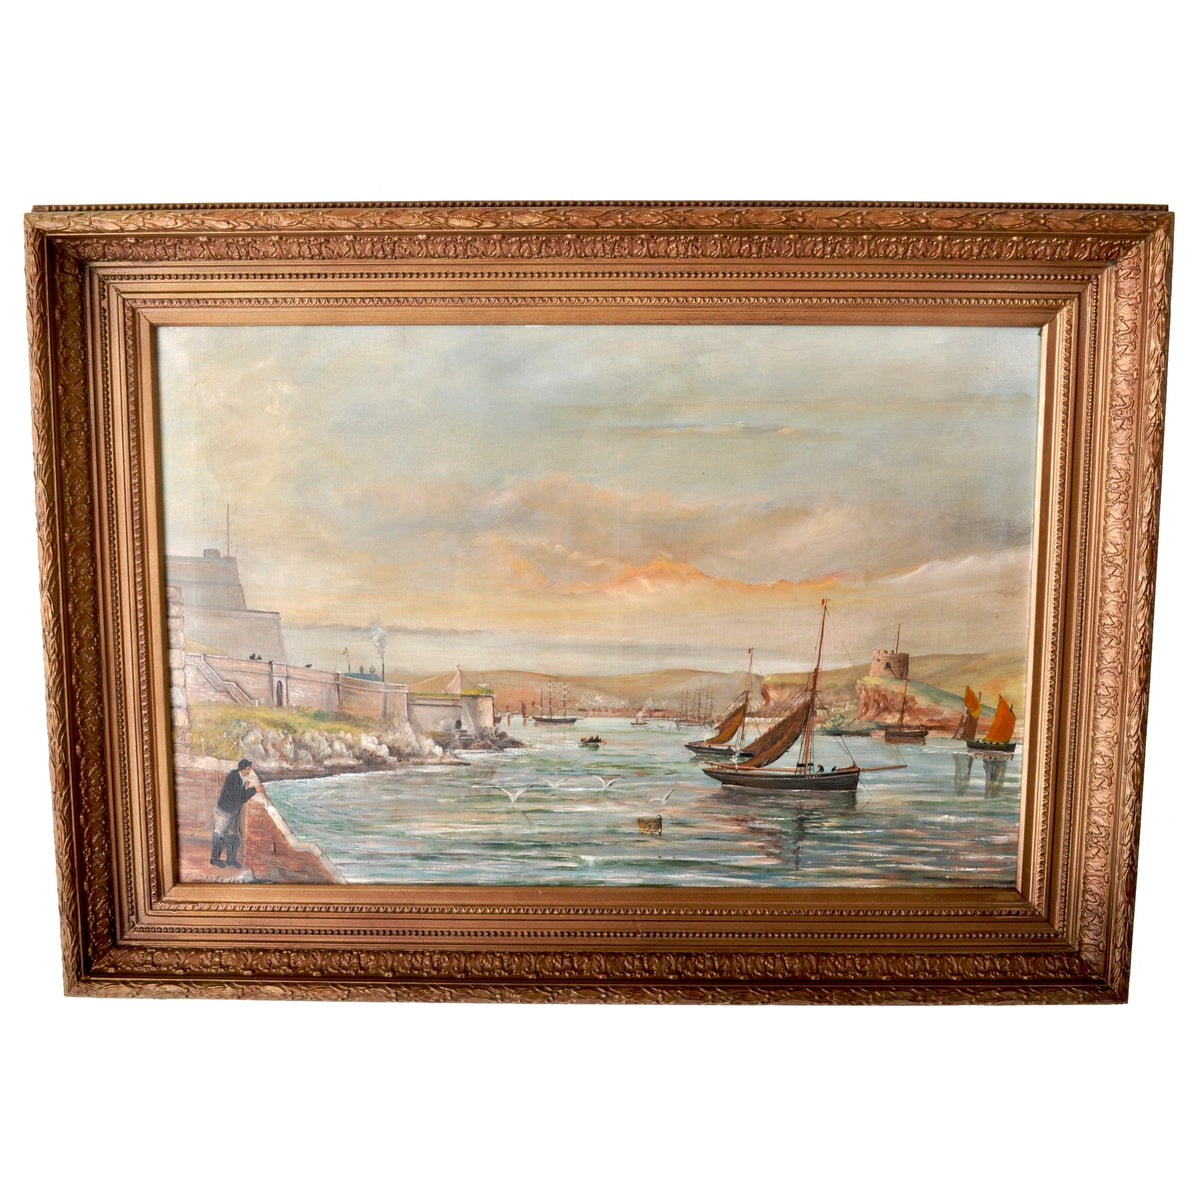 Large Antique Oil on Canvas Seascape Maritime Ships Painting William Turner Davey 1843